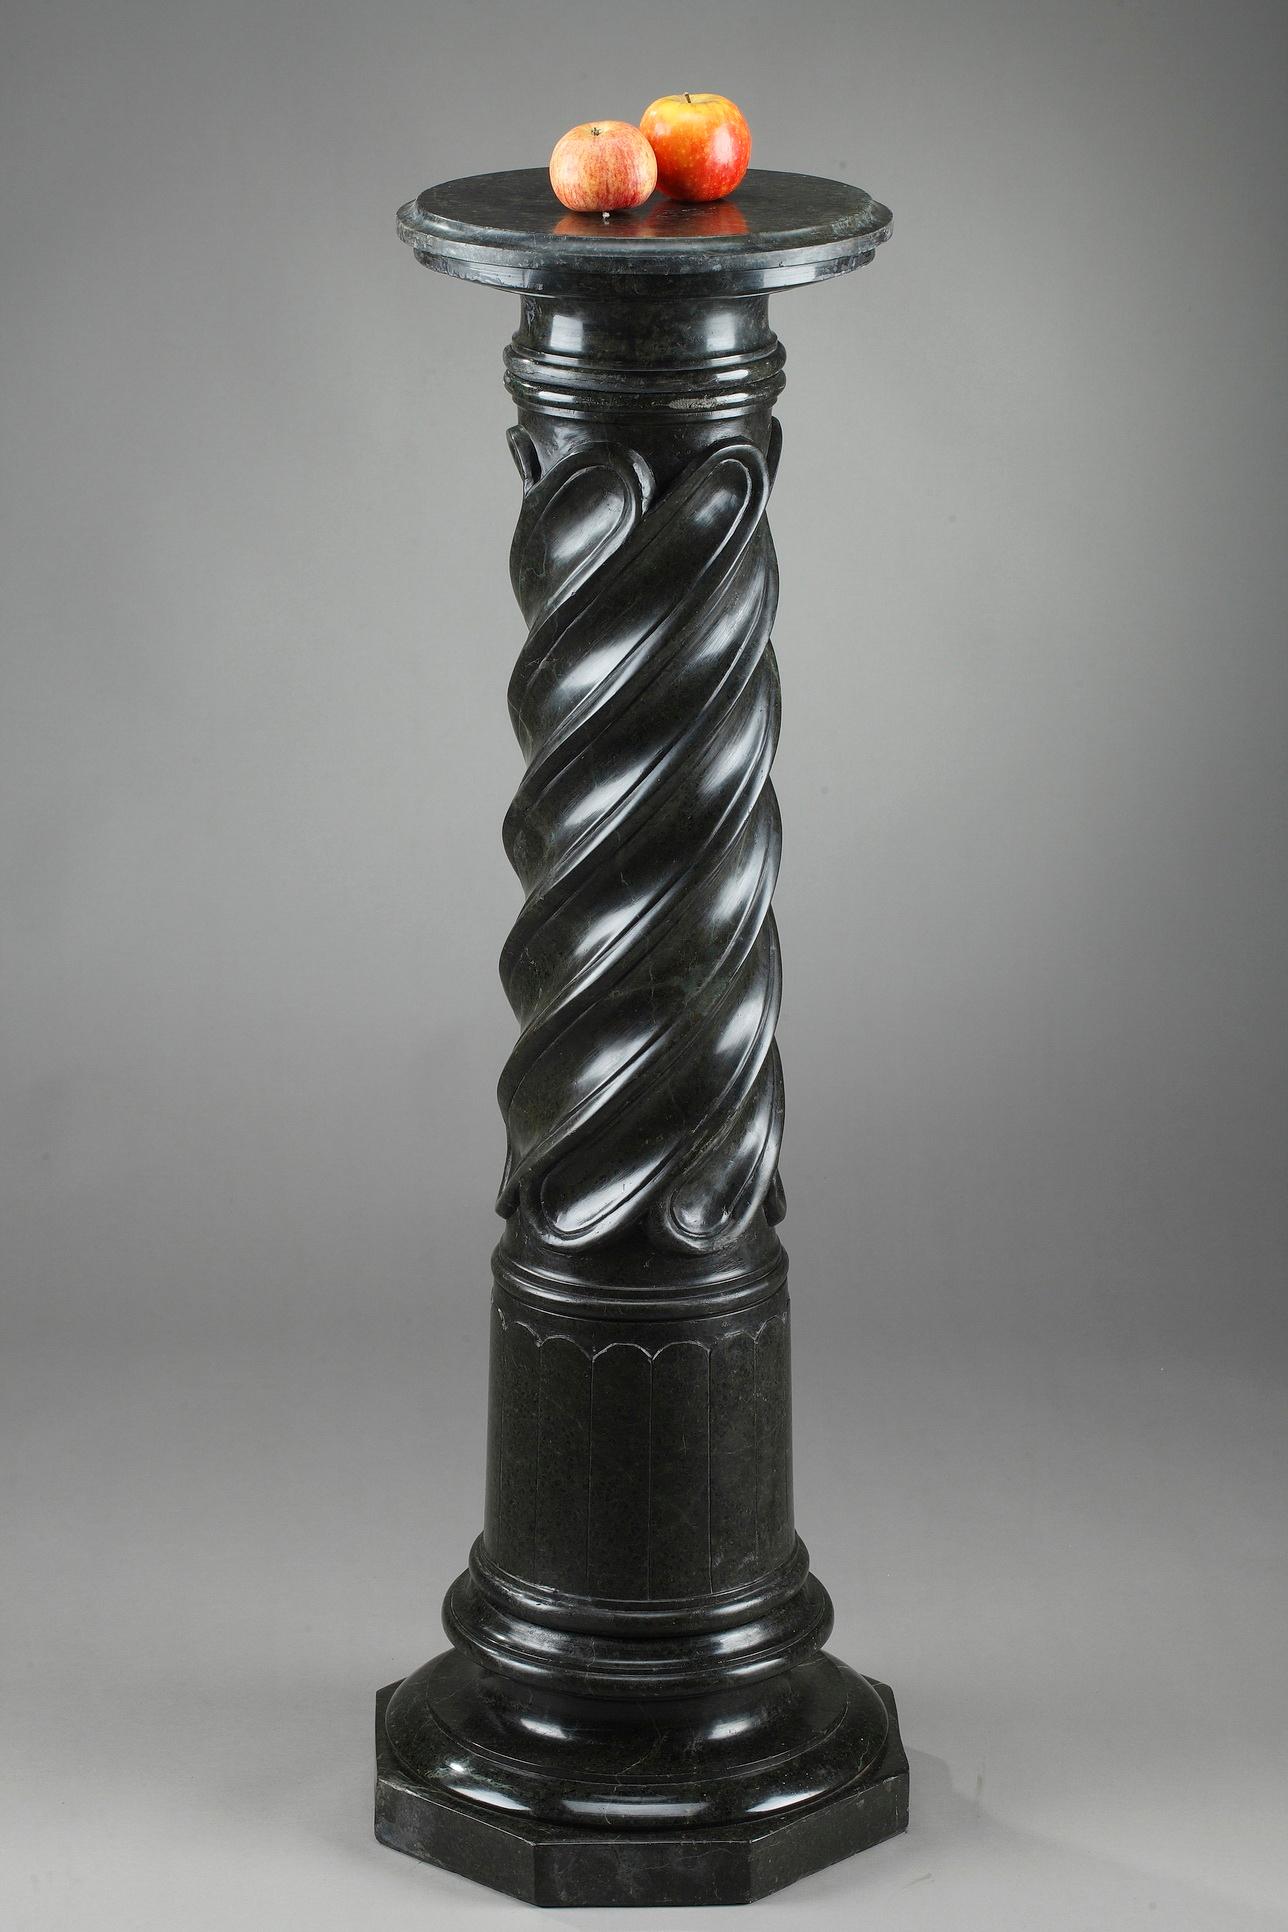 Late 19th century large spiraling pedestal stand with Doric capital. The column is sculpted in solid green marble. It is decorated with flutes and rests on a base with multiple terraced, beveled edges. The tray is marked: 32,

circa